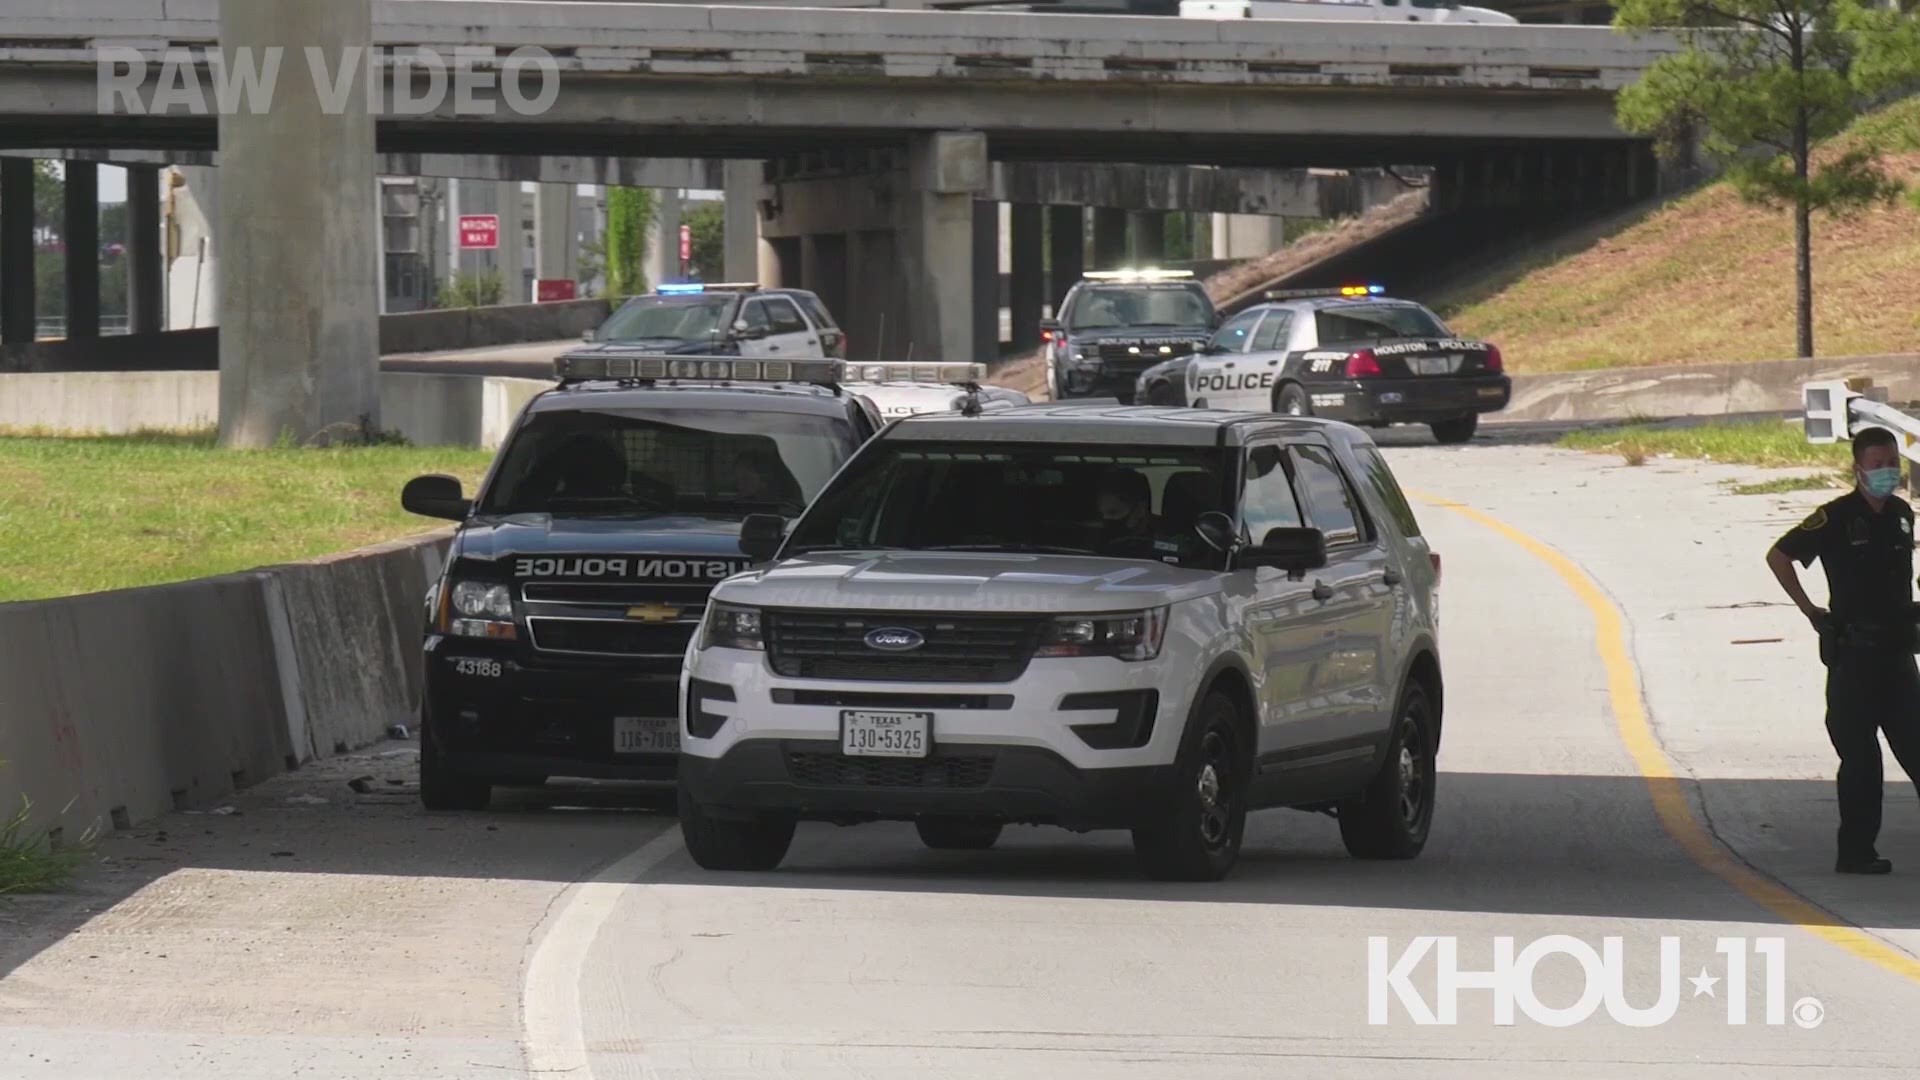 HPD vehicular crimes investigators are trying to determine whether the rider was racing another vehicle or involved in a possible road rage incident.